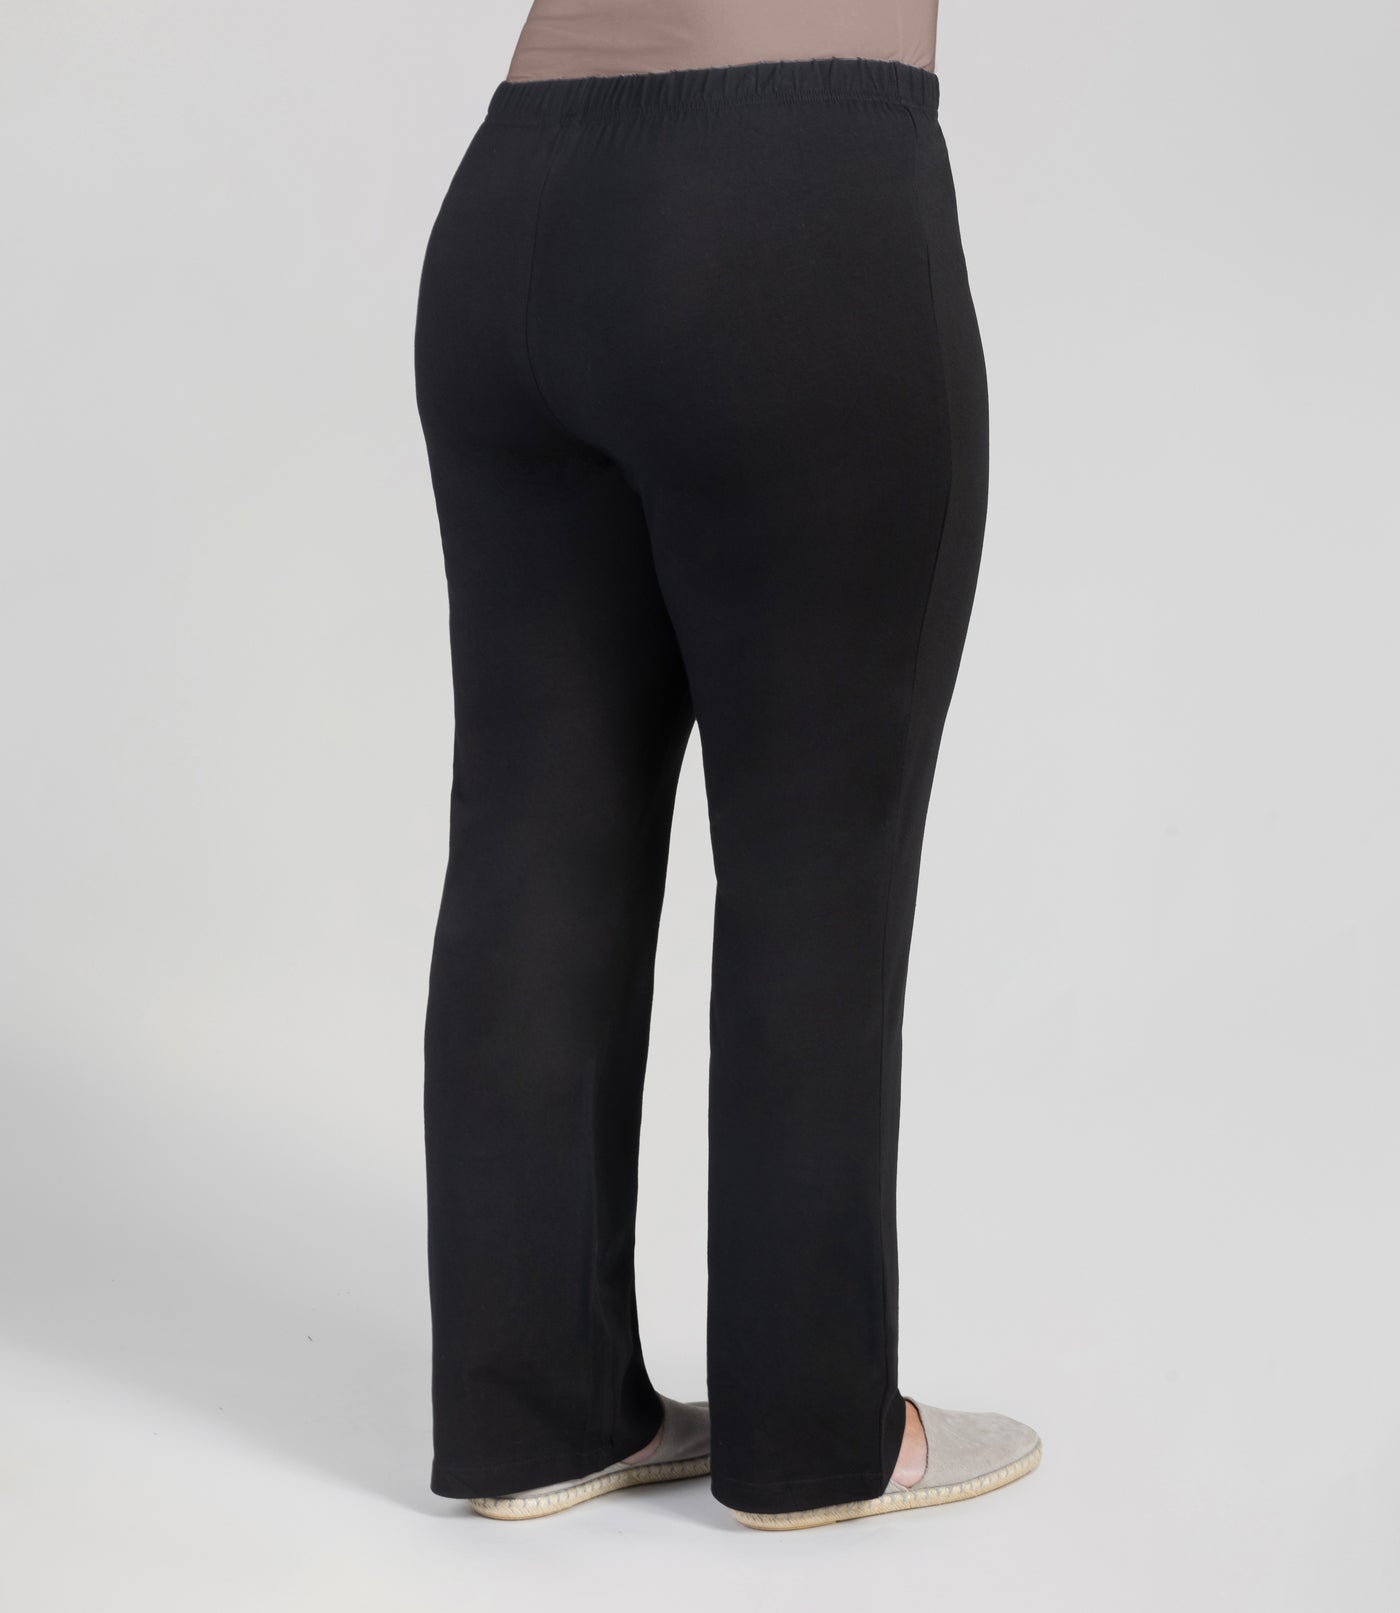 Stretch Naturals Loose Fit Boot Cut Leggings, Plus Size Activewear